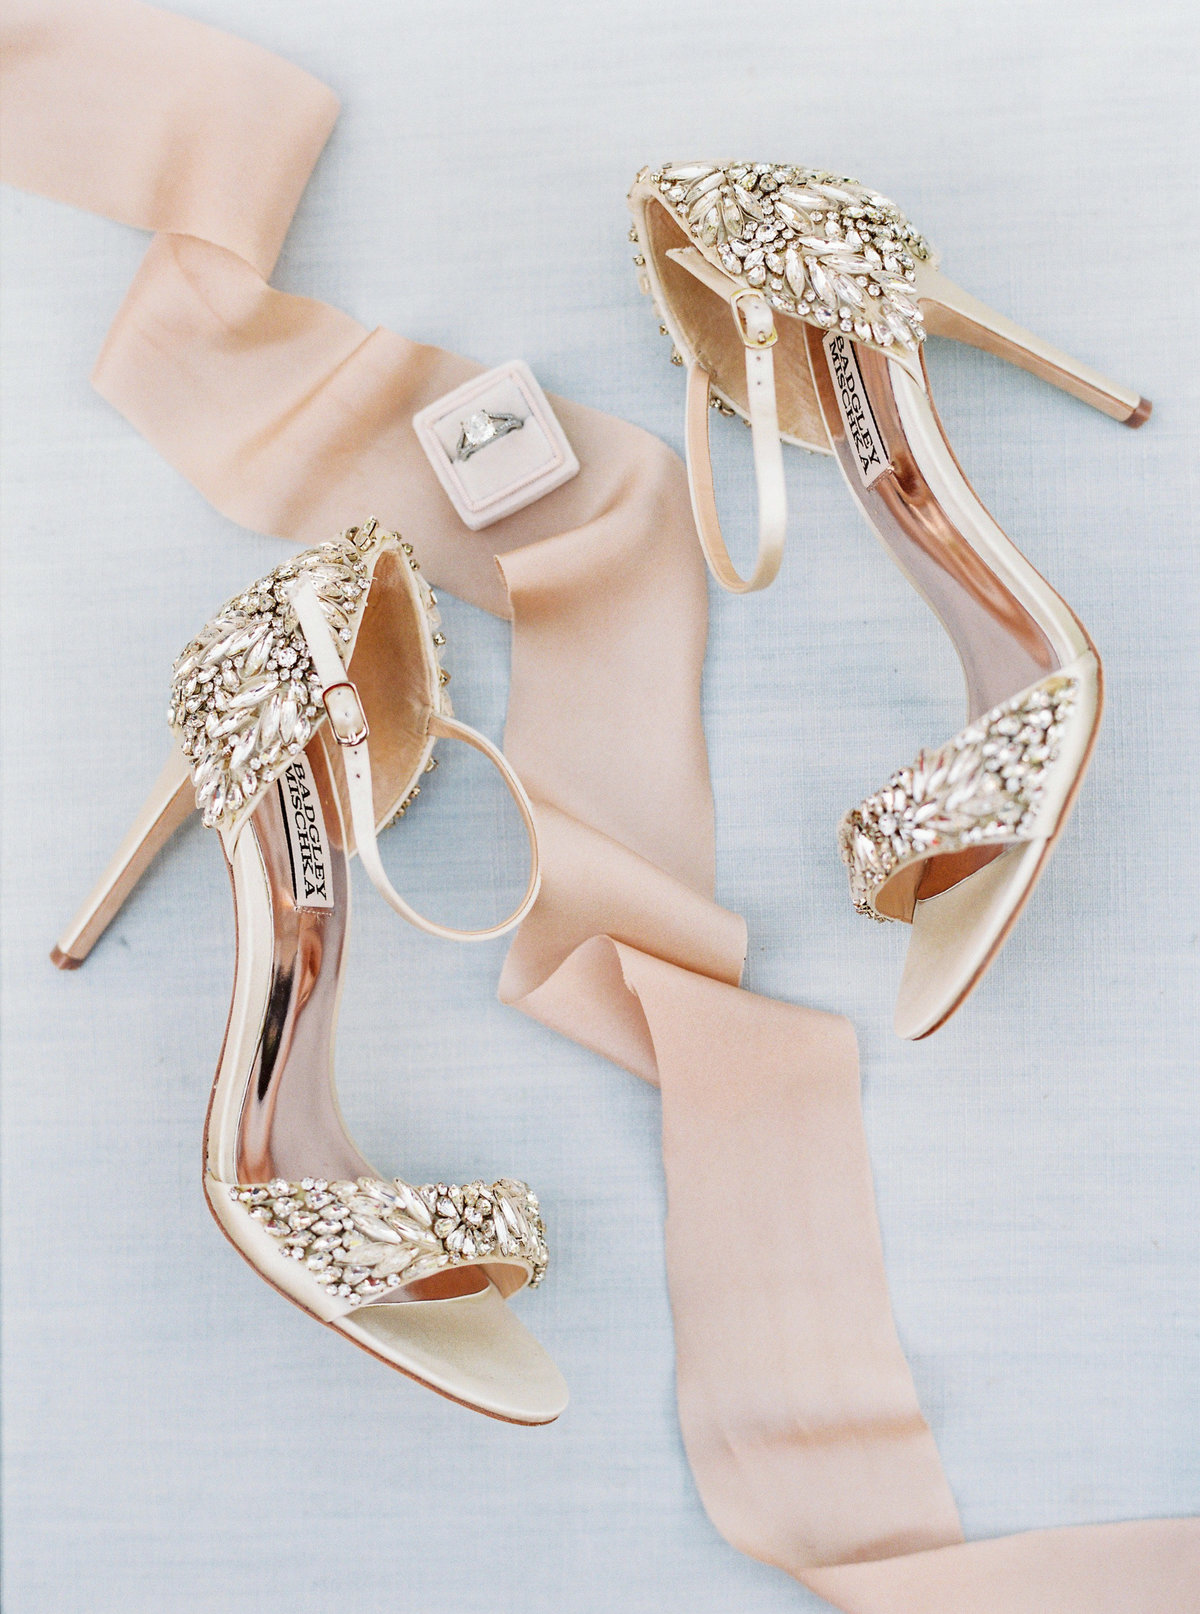 blush wedding shoes with crystals